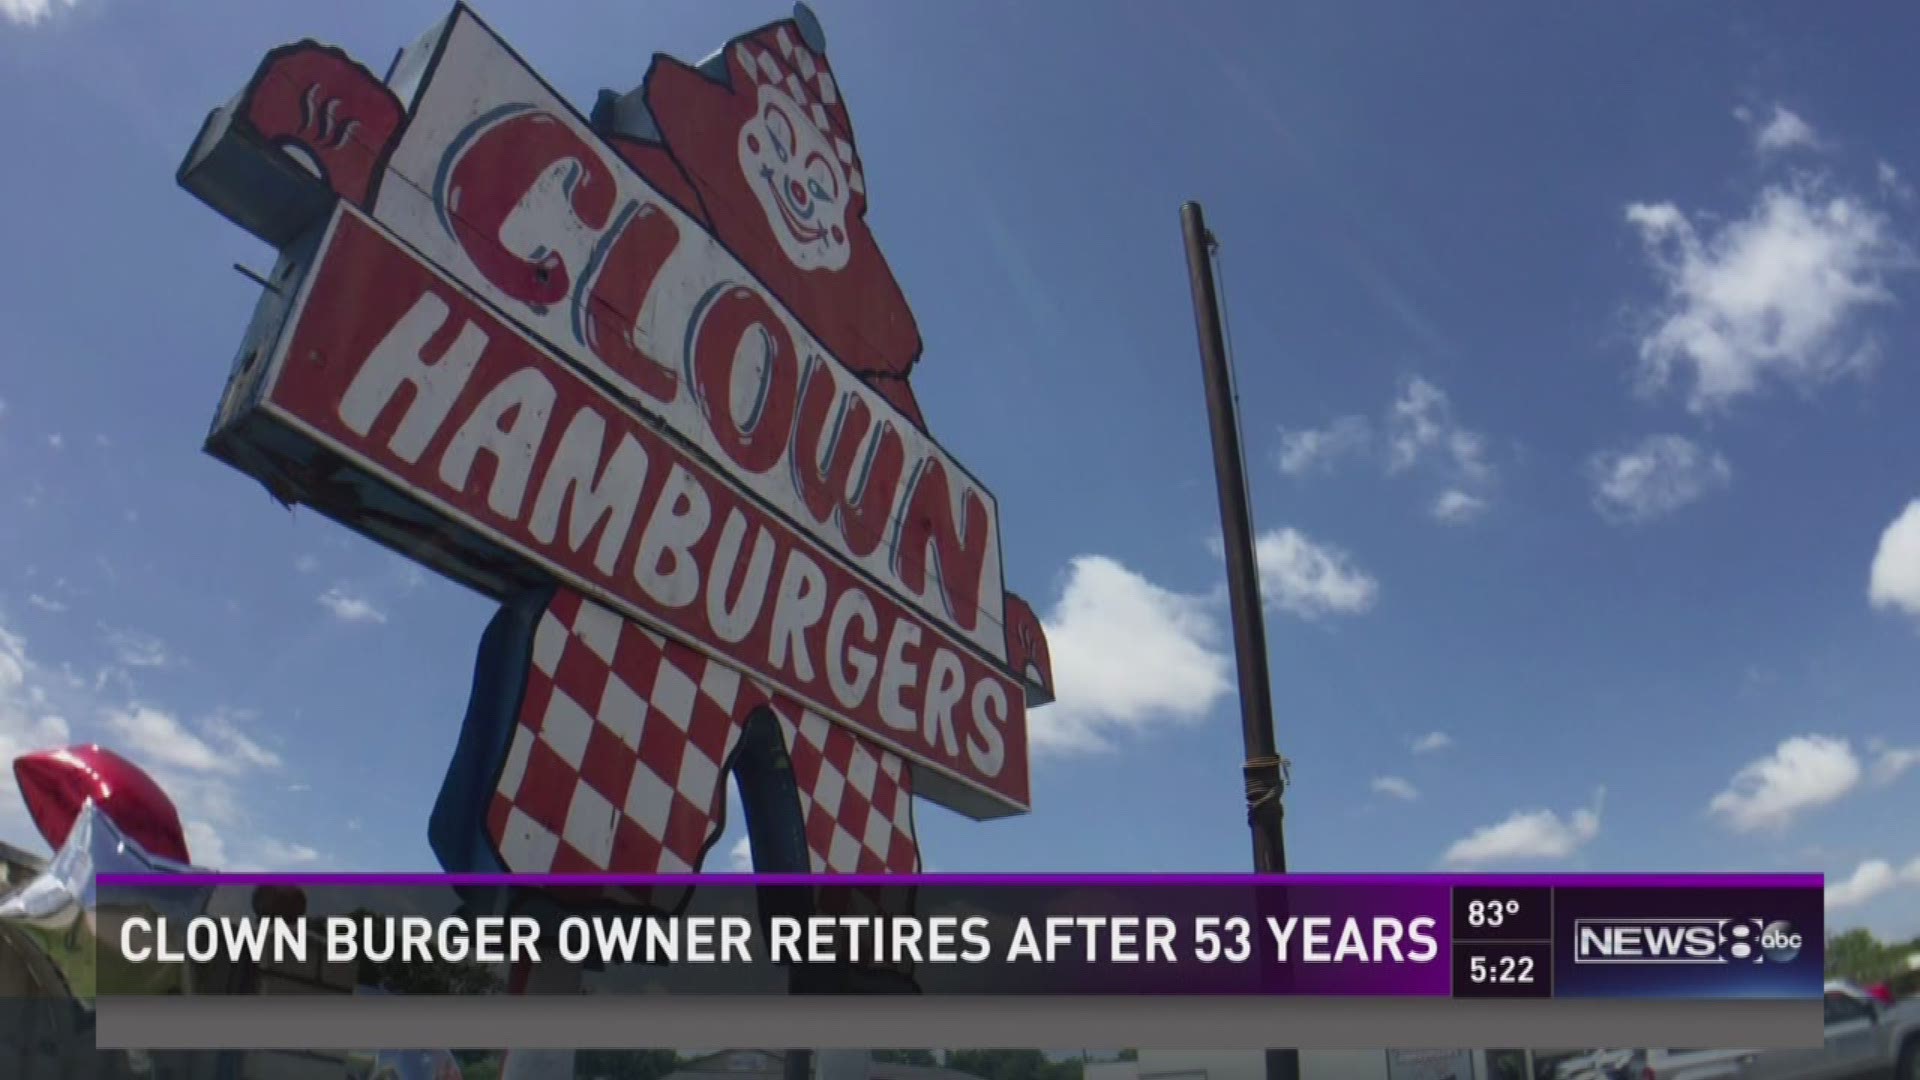 Clown Burger owner retires after 53 years